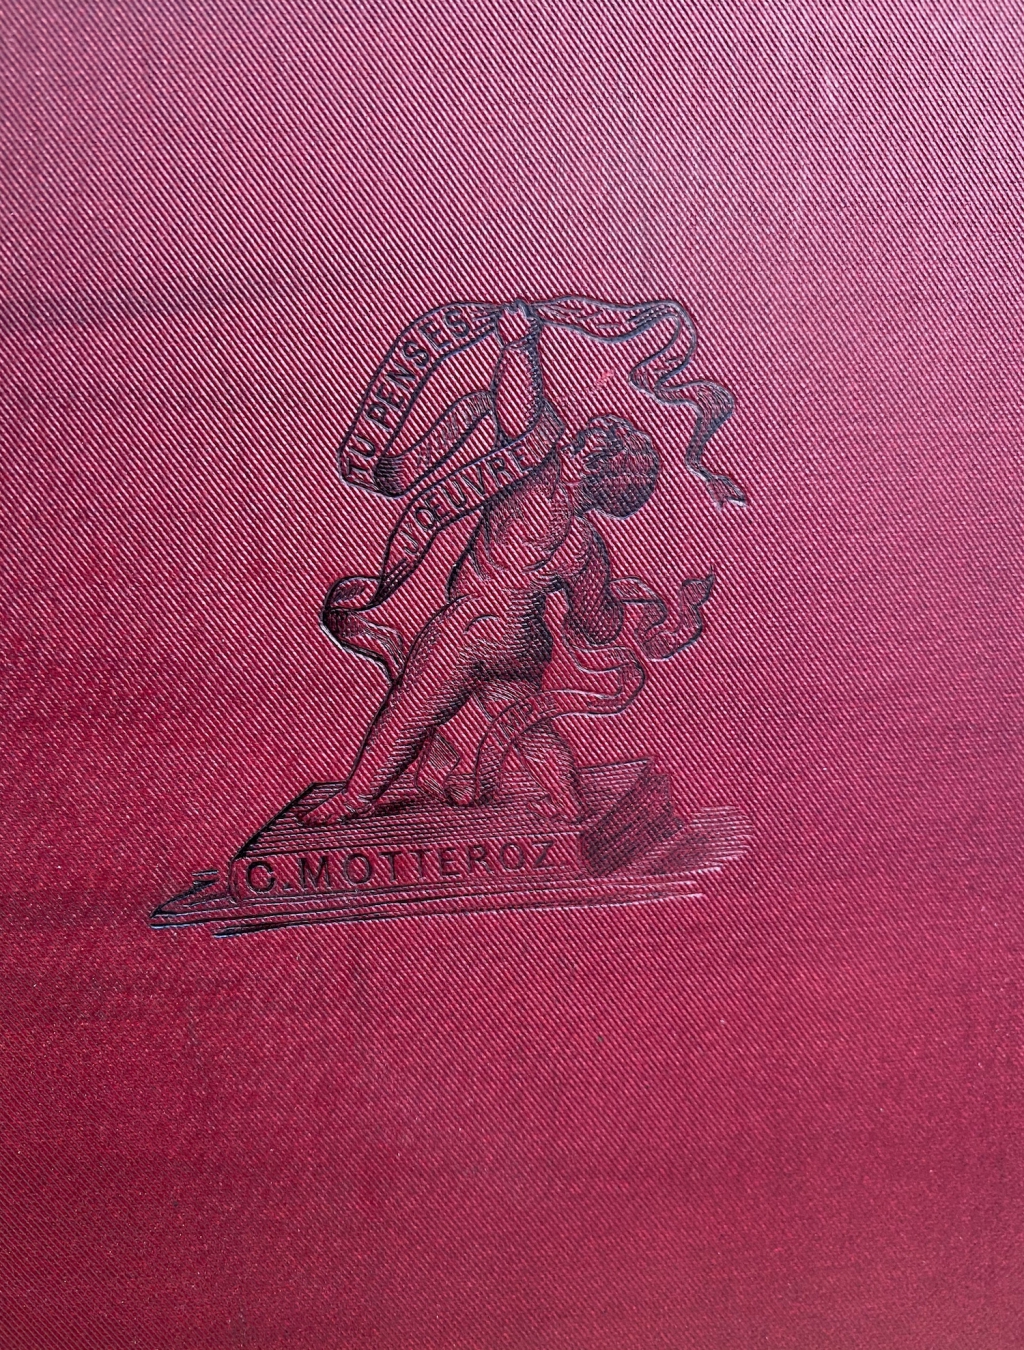 Motteroz, the printer of Vachon's book, had this unusual, baroque style printer's mark embossed on the lower cover of the original cloth binding, suggesting that his bindery probably was resp